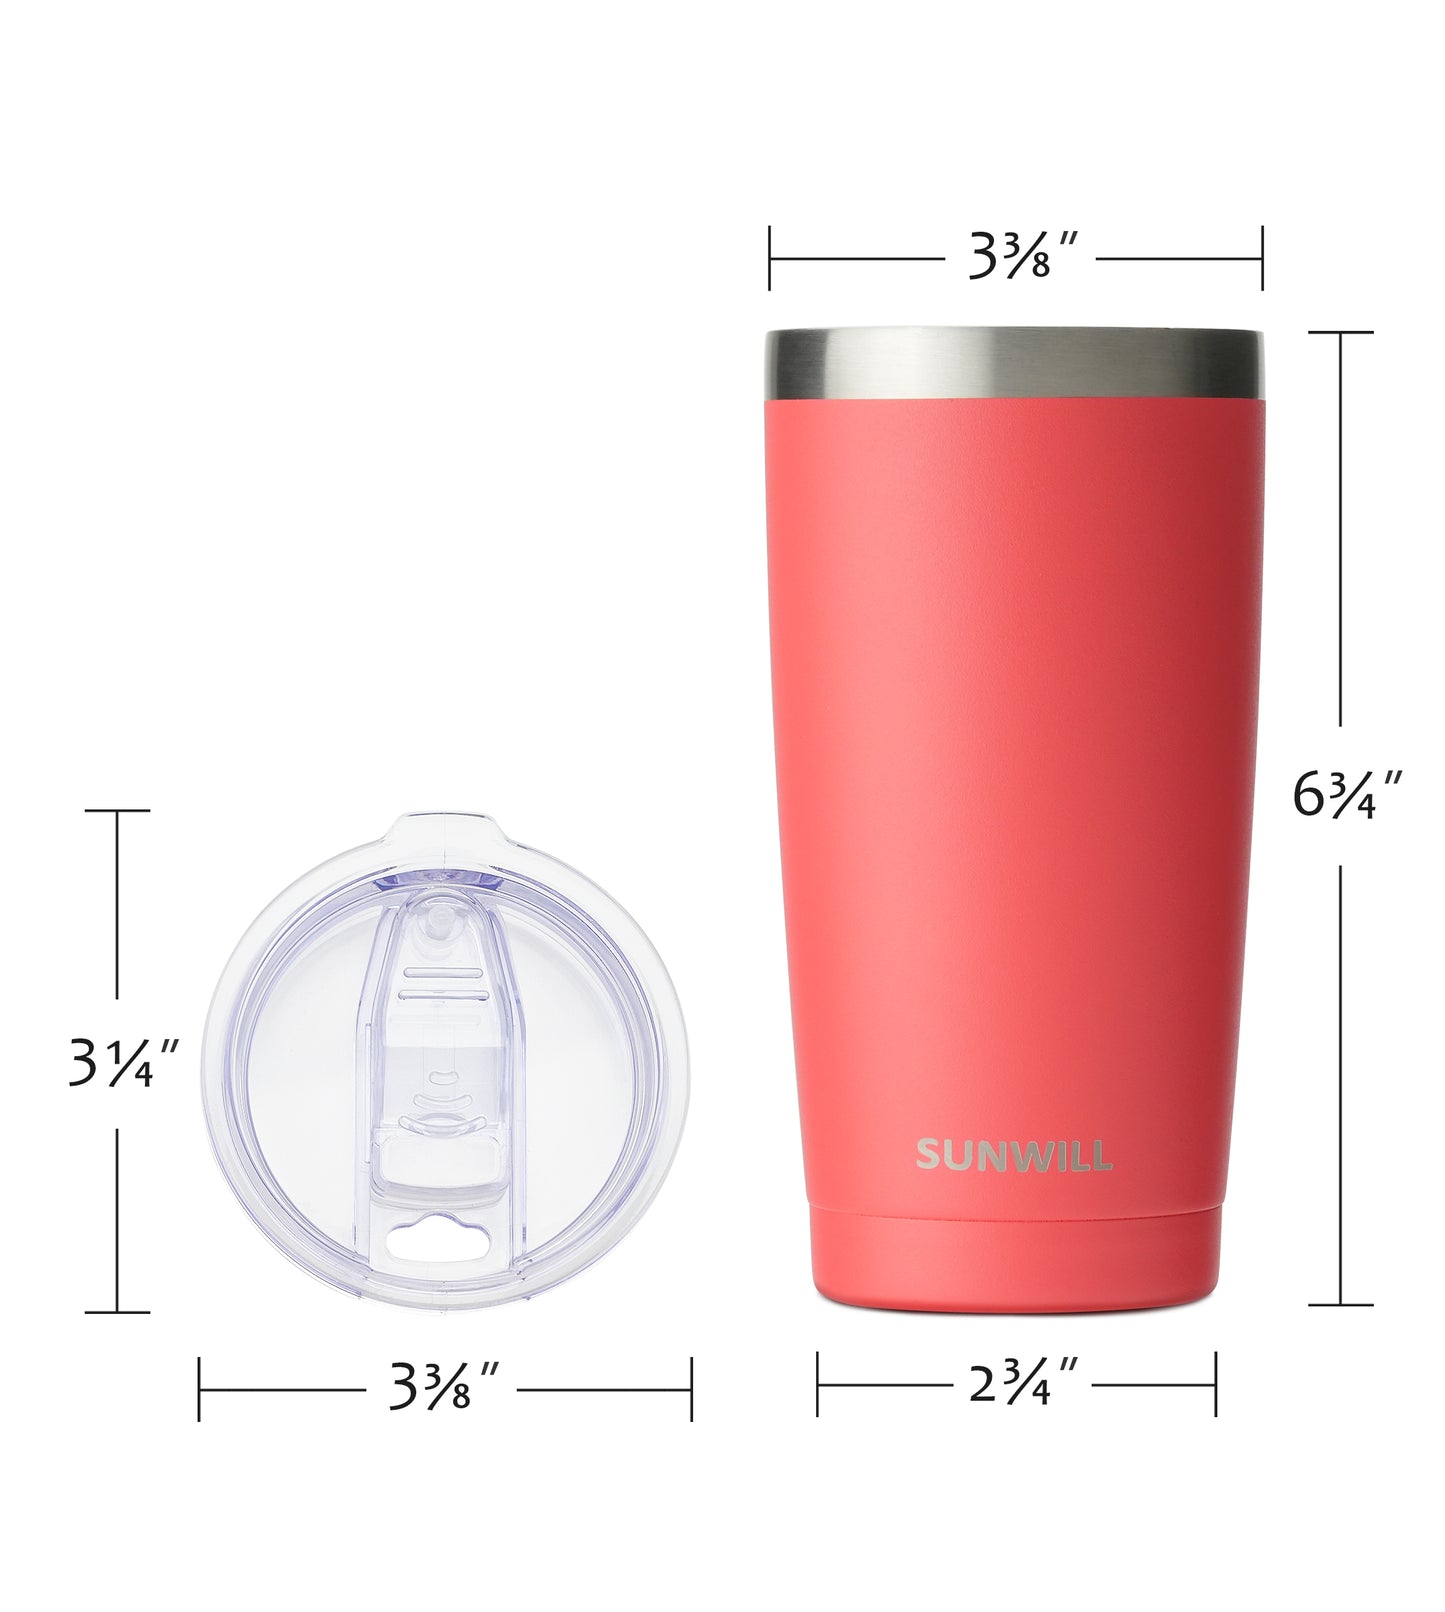 20oz Travel Tumbler With Sliding Lid - Powder Coated Teal & Coral